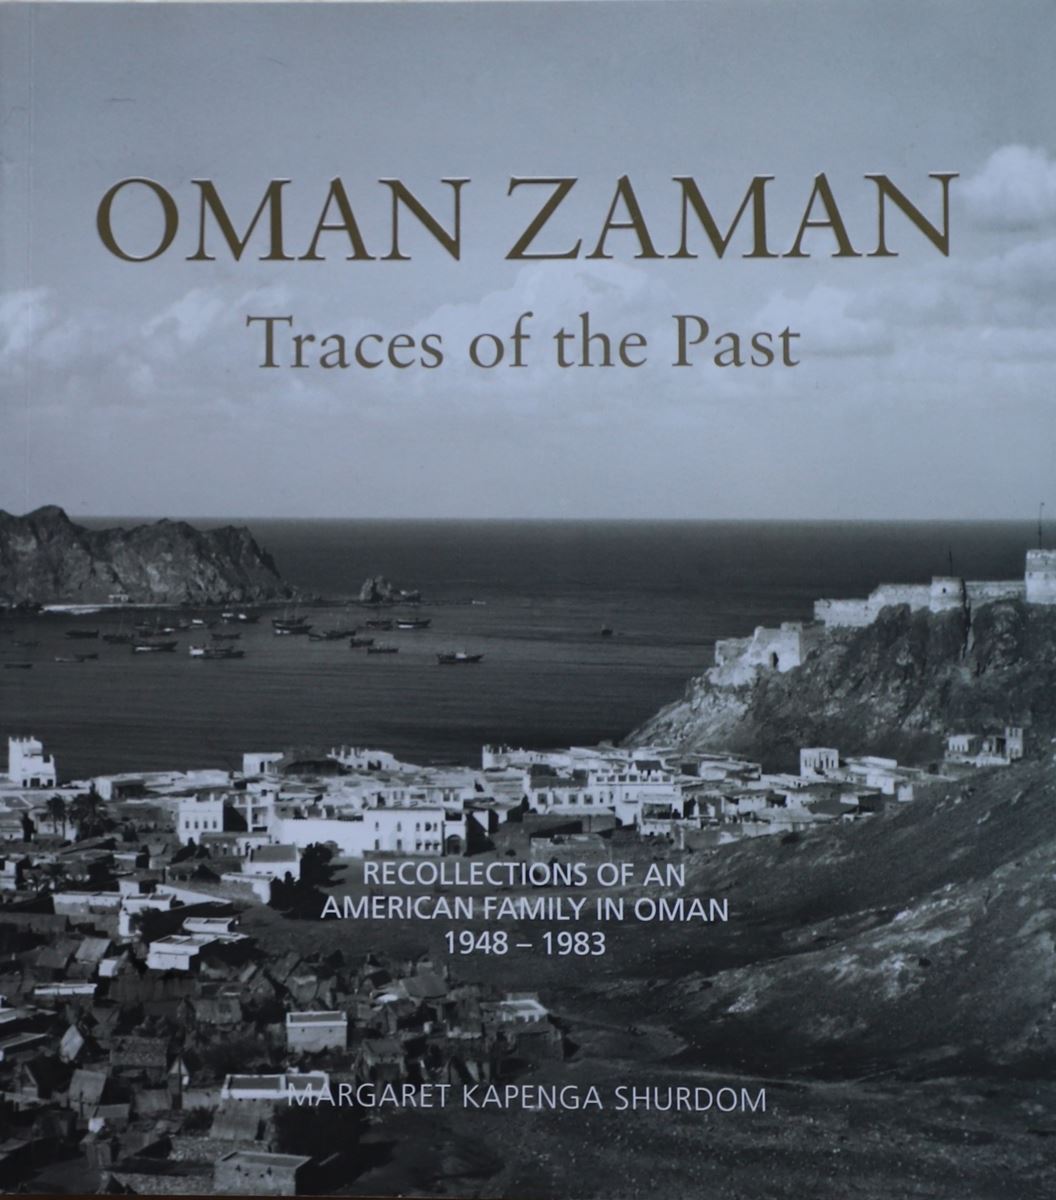 Oman Zaman - Book review by Maggie Jeans